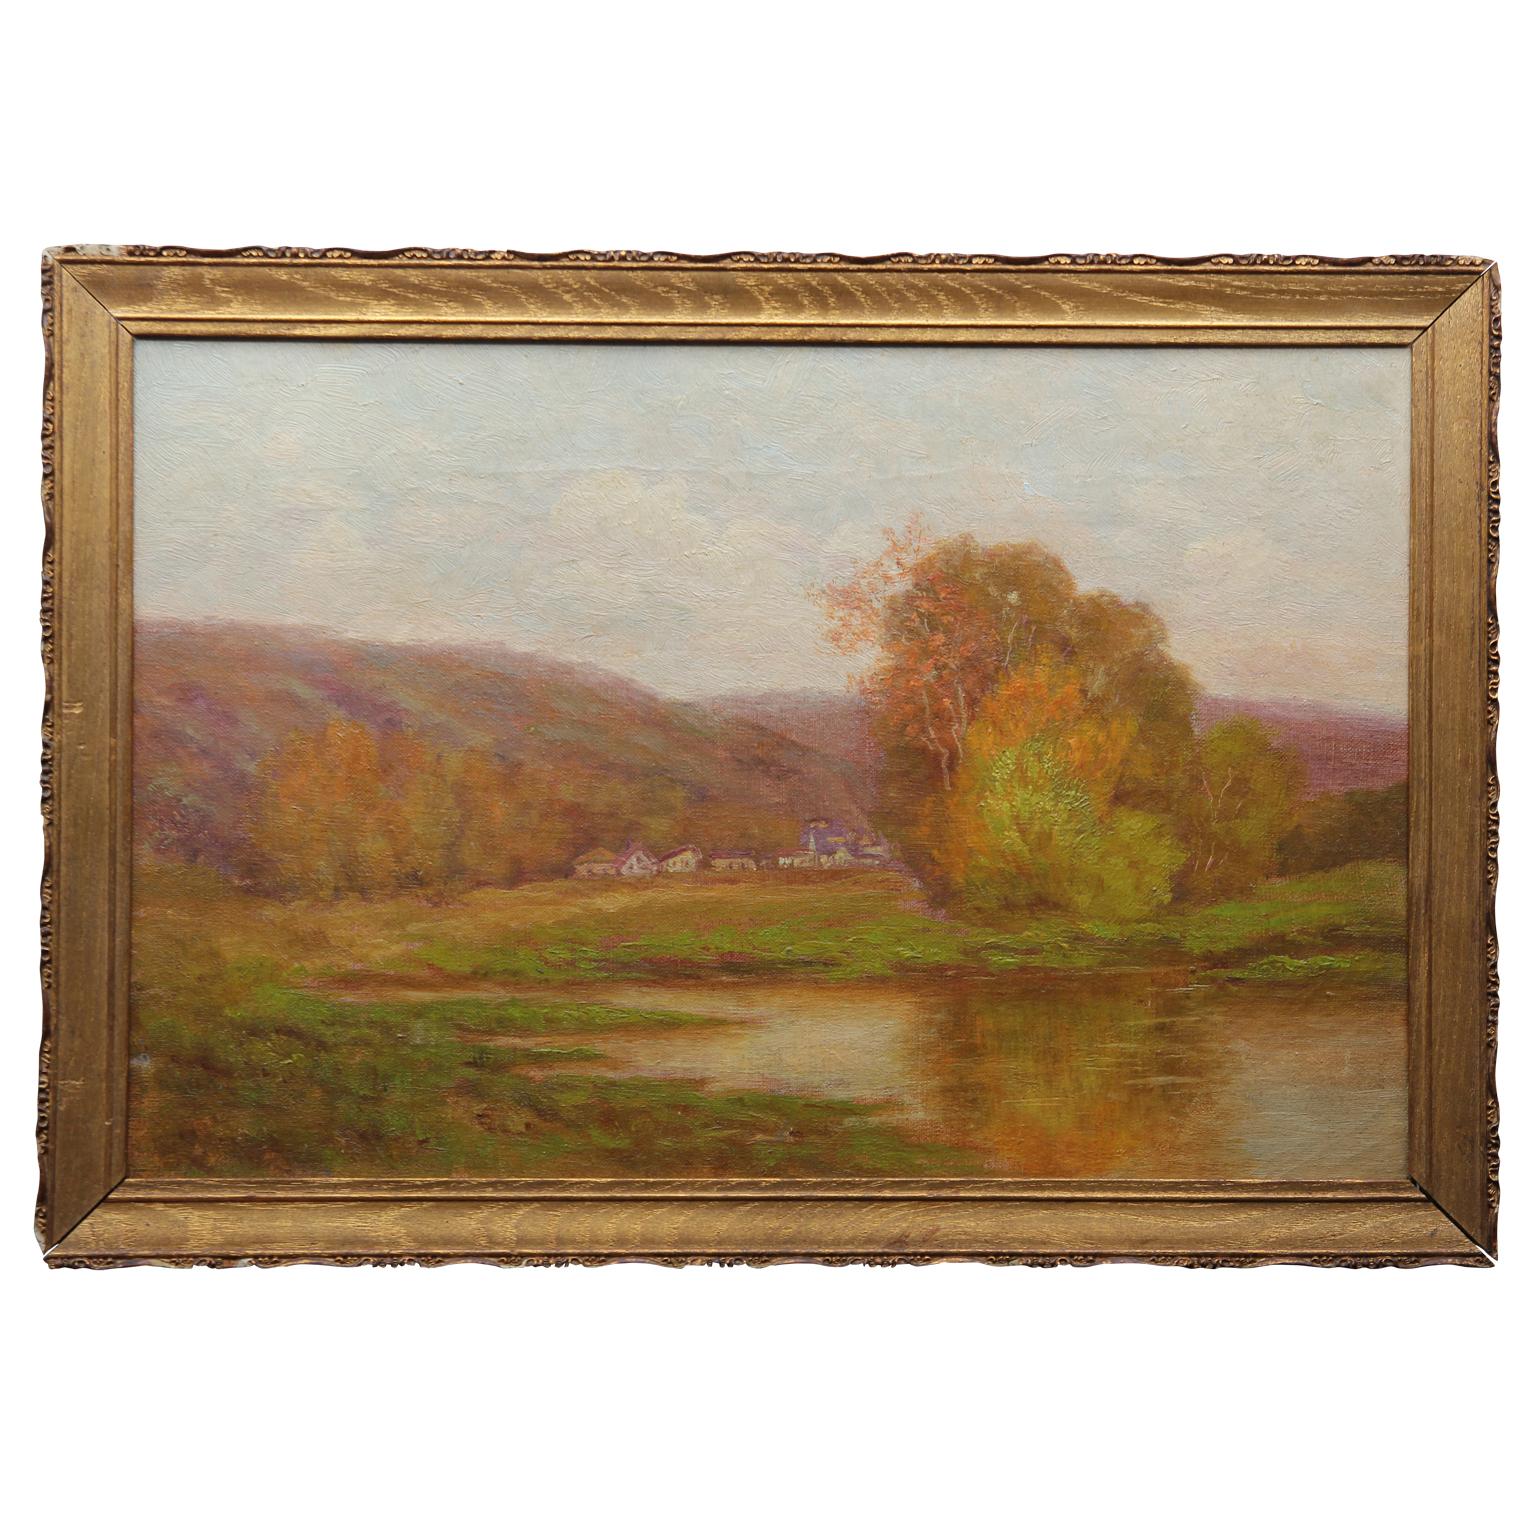 A traditional pastoral landscape with a small town at the foot of hills in the background. There is a lake in the foreground. The work is framed in a thin gold wooden frame. On the canvas stretcher the initials A. V. Tack is written in